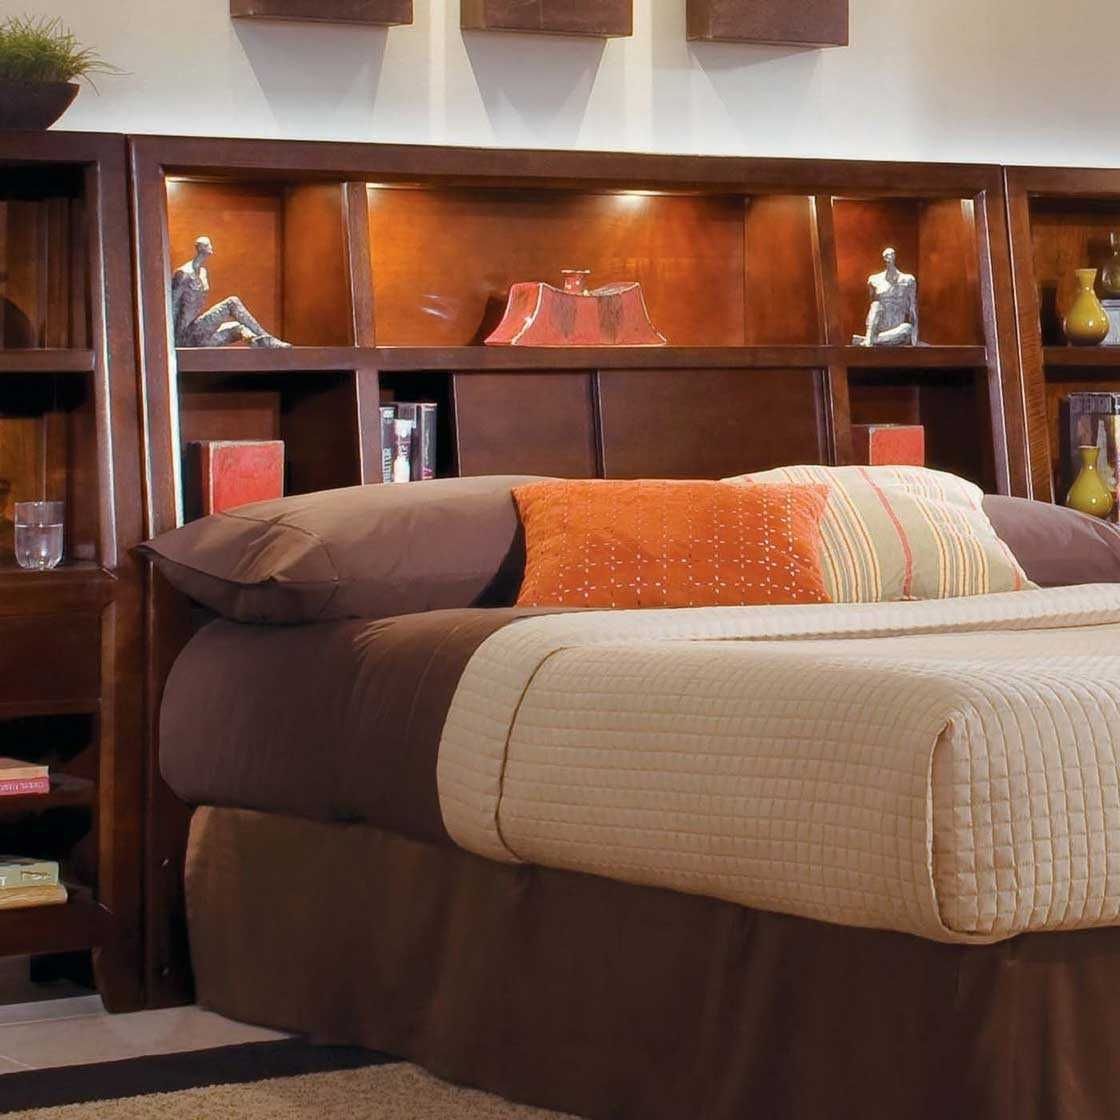 Preferred The Best King Bookcase Headboard Ideas With Size Shelves Picture With Regard To Bookcases Headboard King (View 7 of 15)